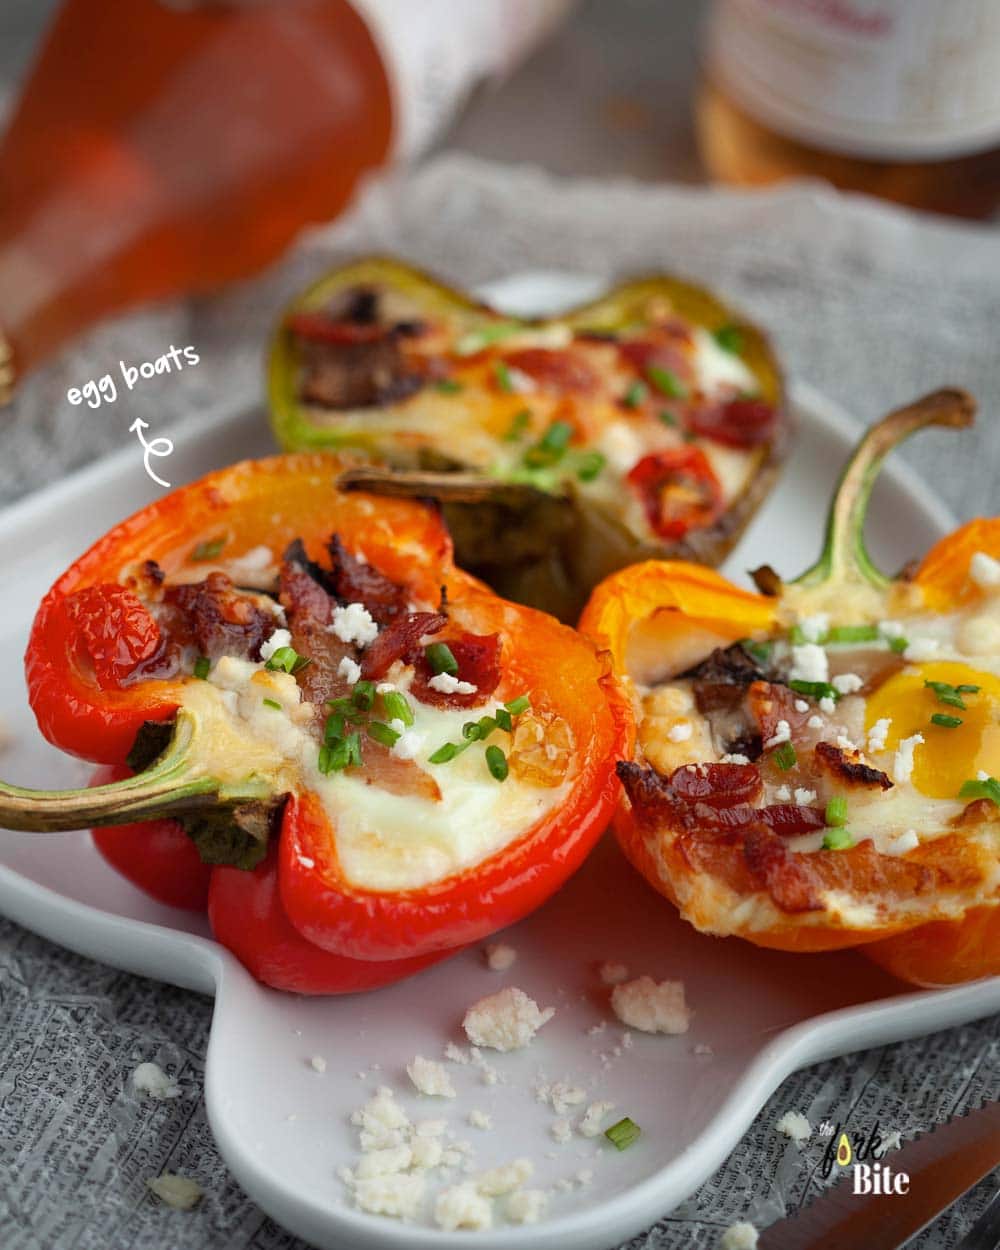 If you’re on a paleo diet, this bell pepper egg boat breakfast is for you. Imagine starting your day with something filling and healthy. How can you go wrong the rest of the day, right?